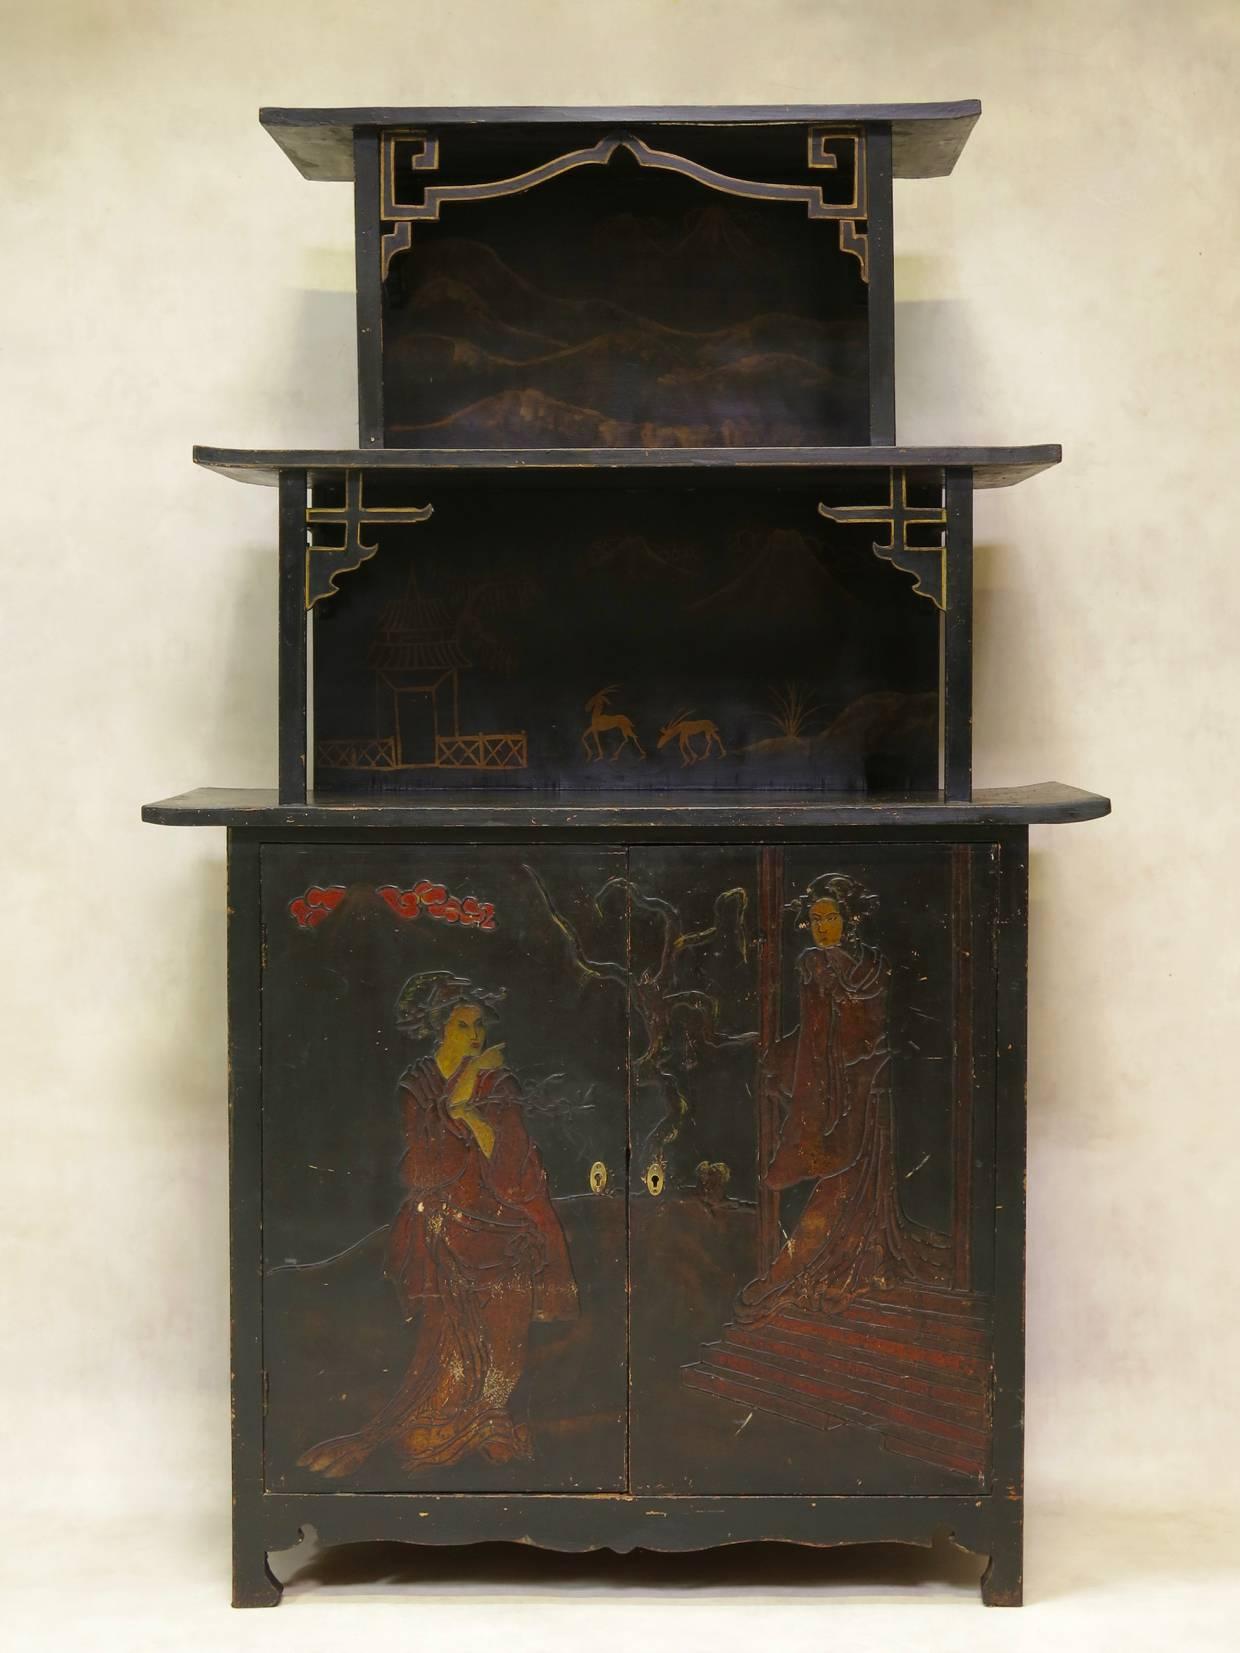 A decorative Chinese style piece of furniture with a closed cabinet section below and a tiered, pagoda-like shelving section above. Ebonized wood, with painted decor in relief.